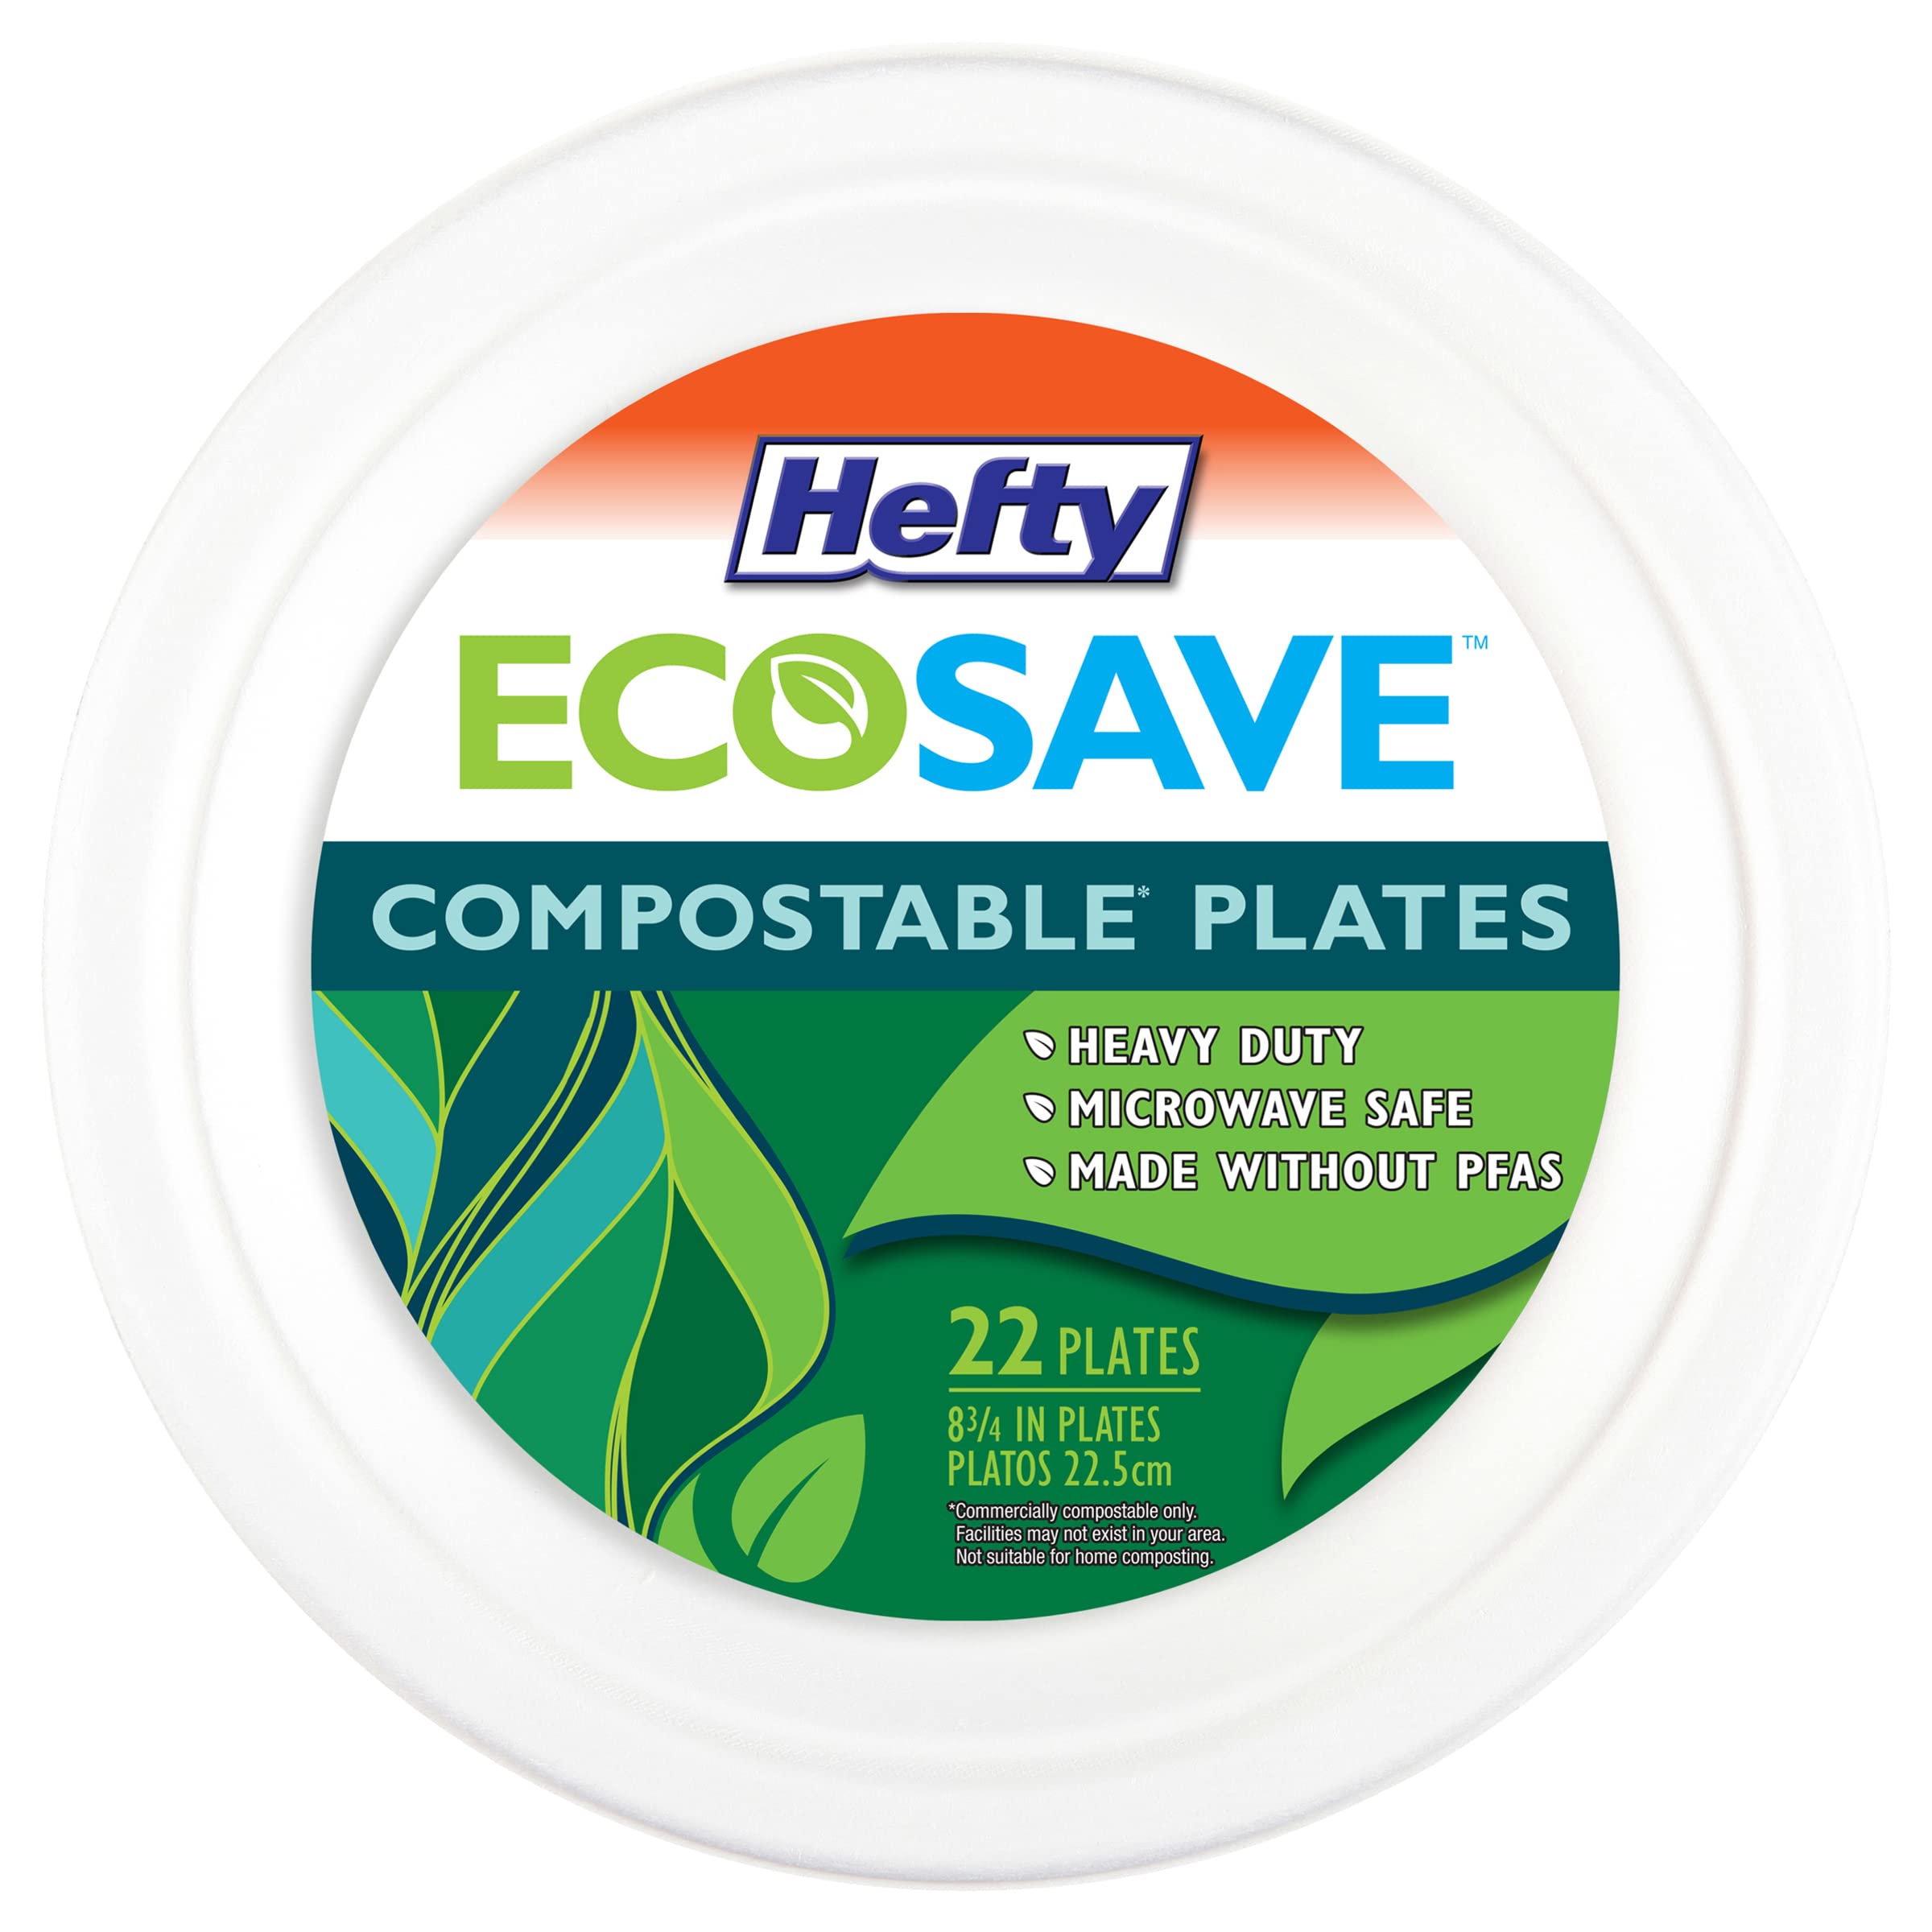 Hefty ECOSAVE Compostable Paper Plates (Pack of 2) - image 1 of 7